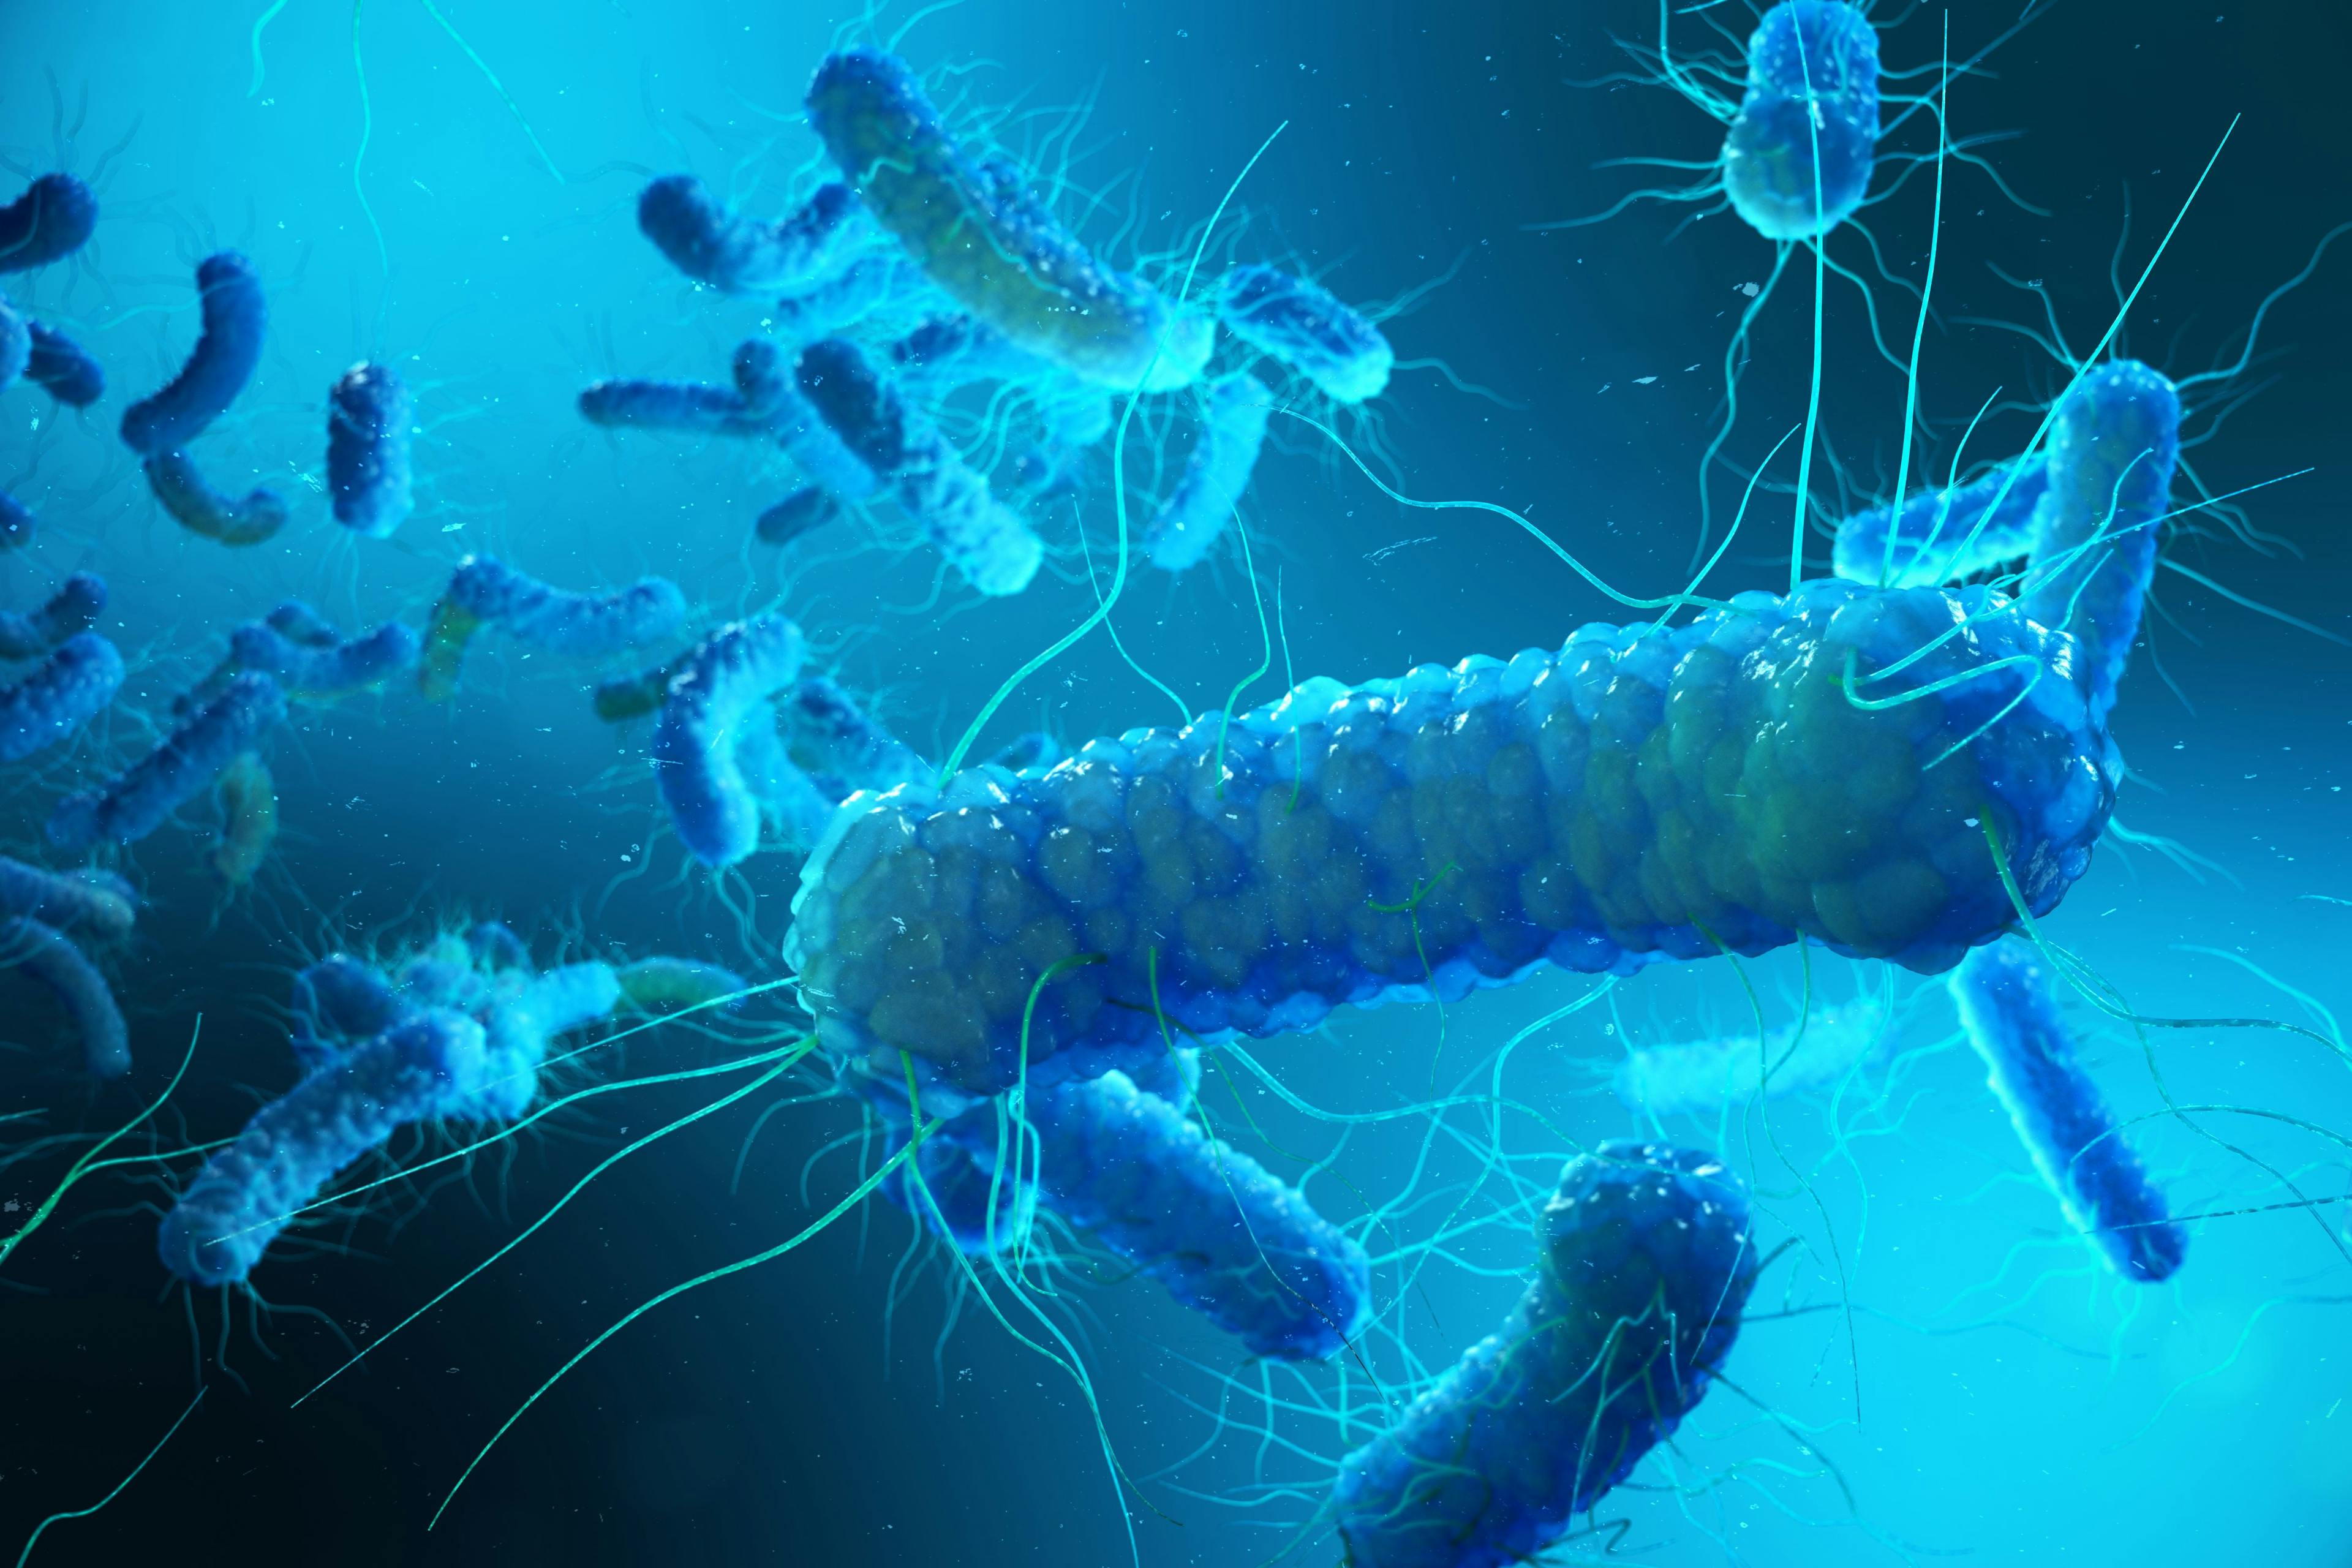 Patent Filed for Application of Ibezapolstat in the Treatment of C. Difficile Infection